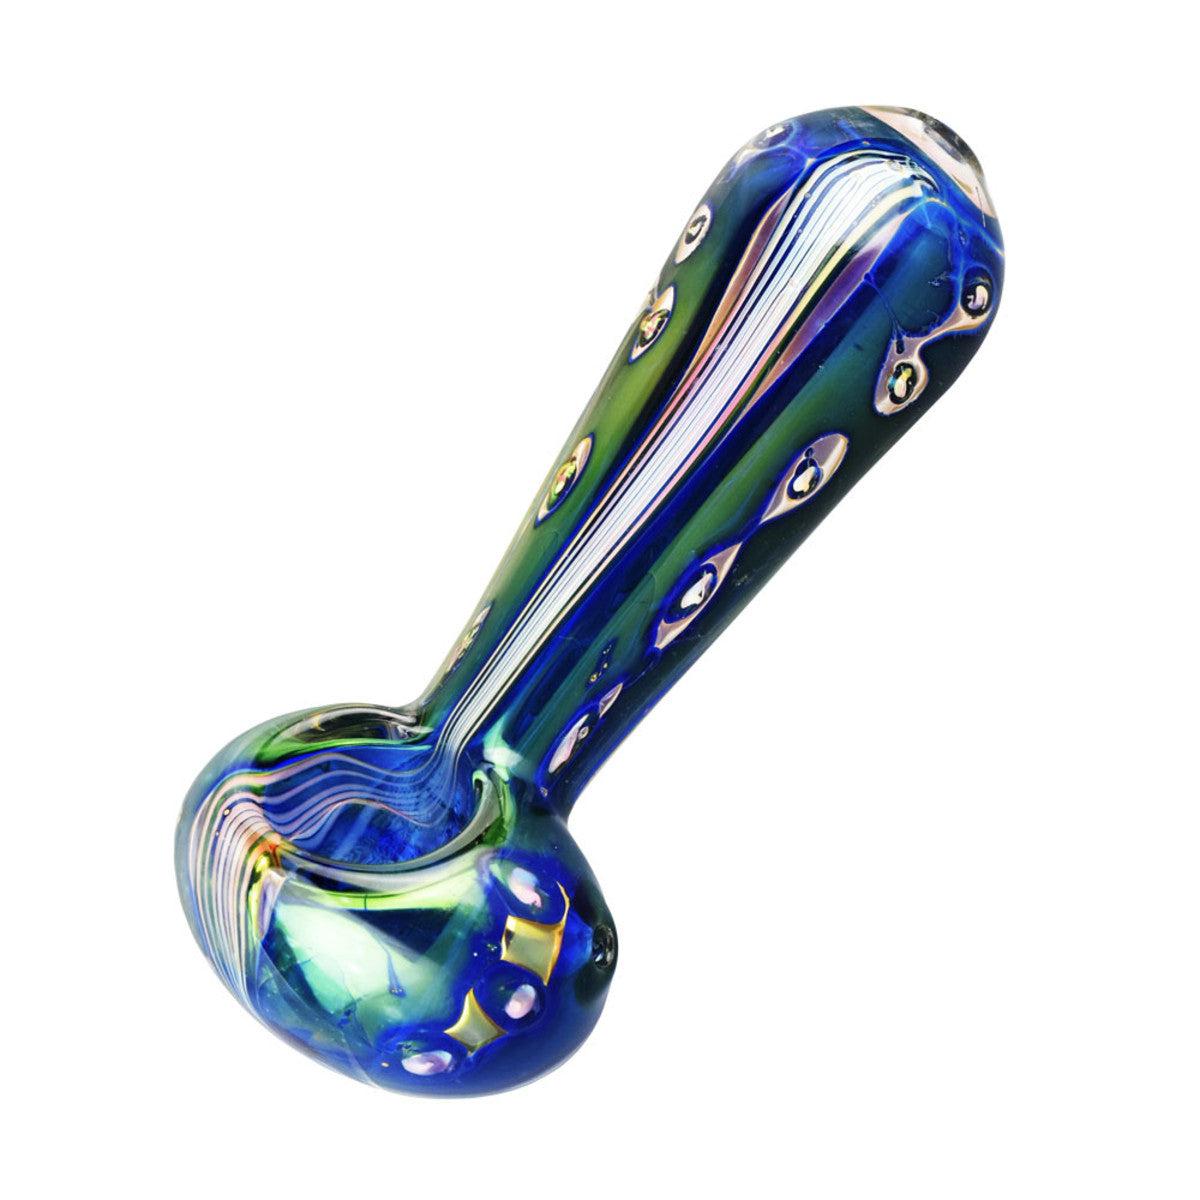 Iridescent Stripes and Spots Glass Pipe